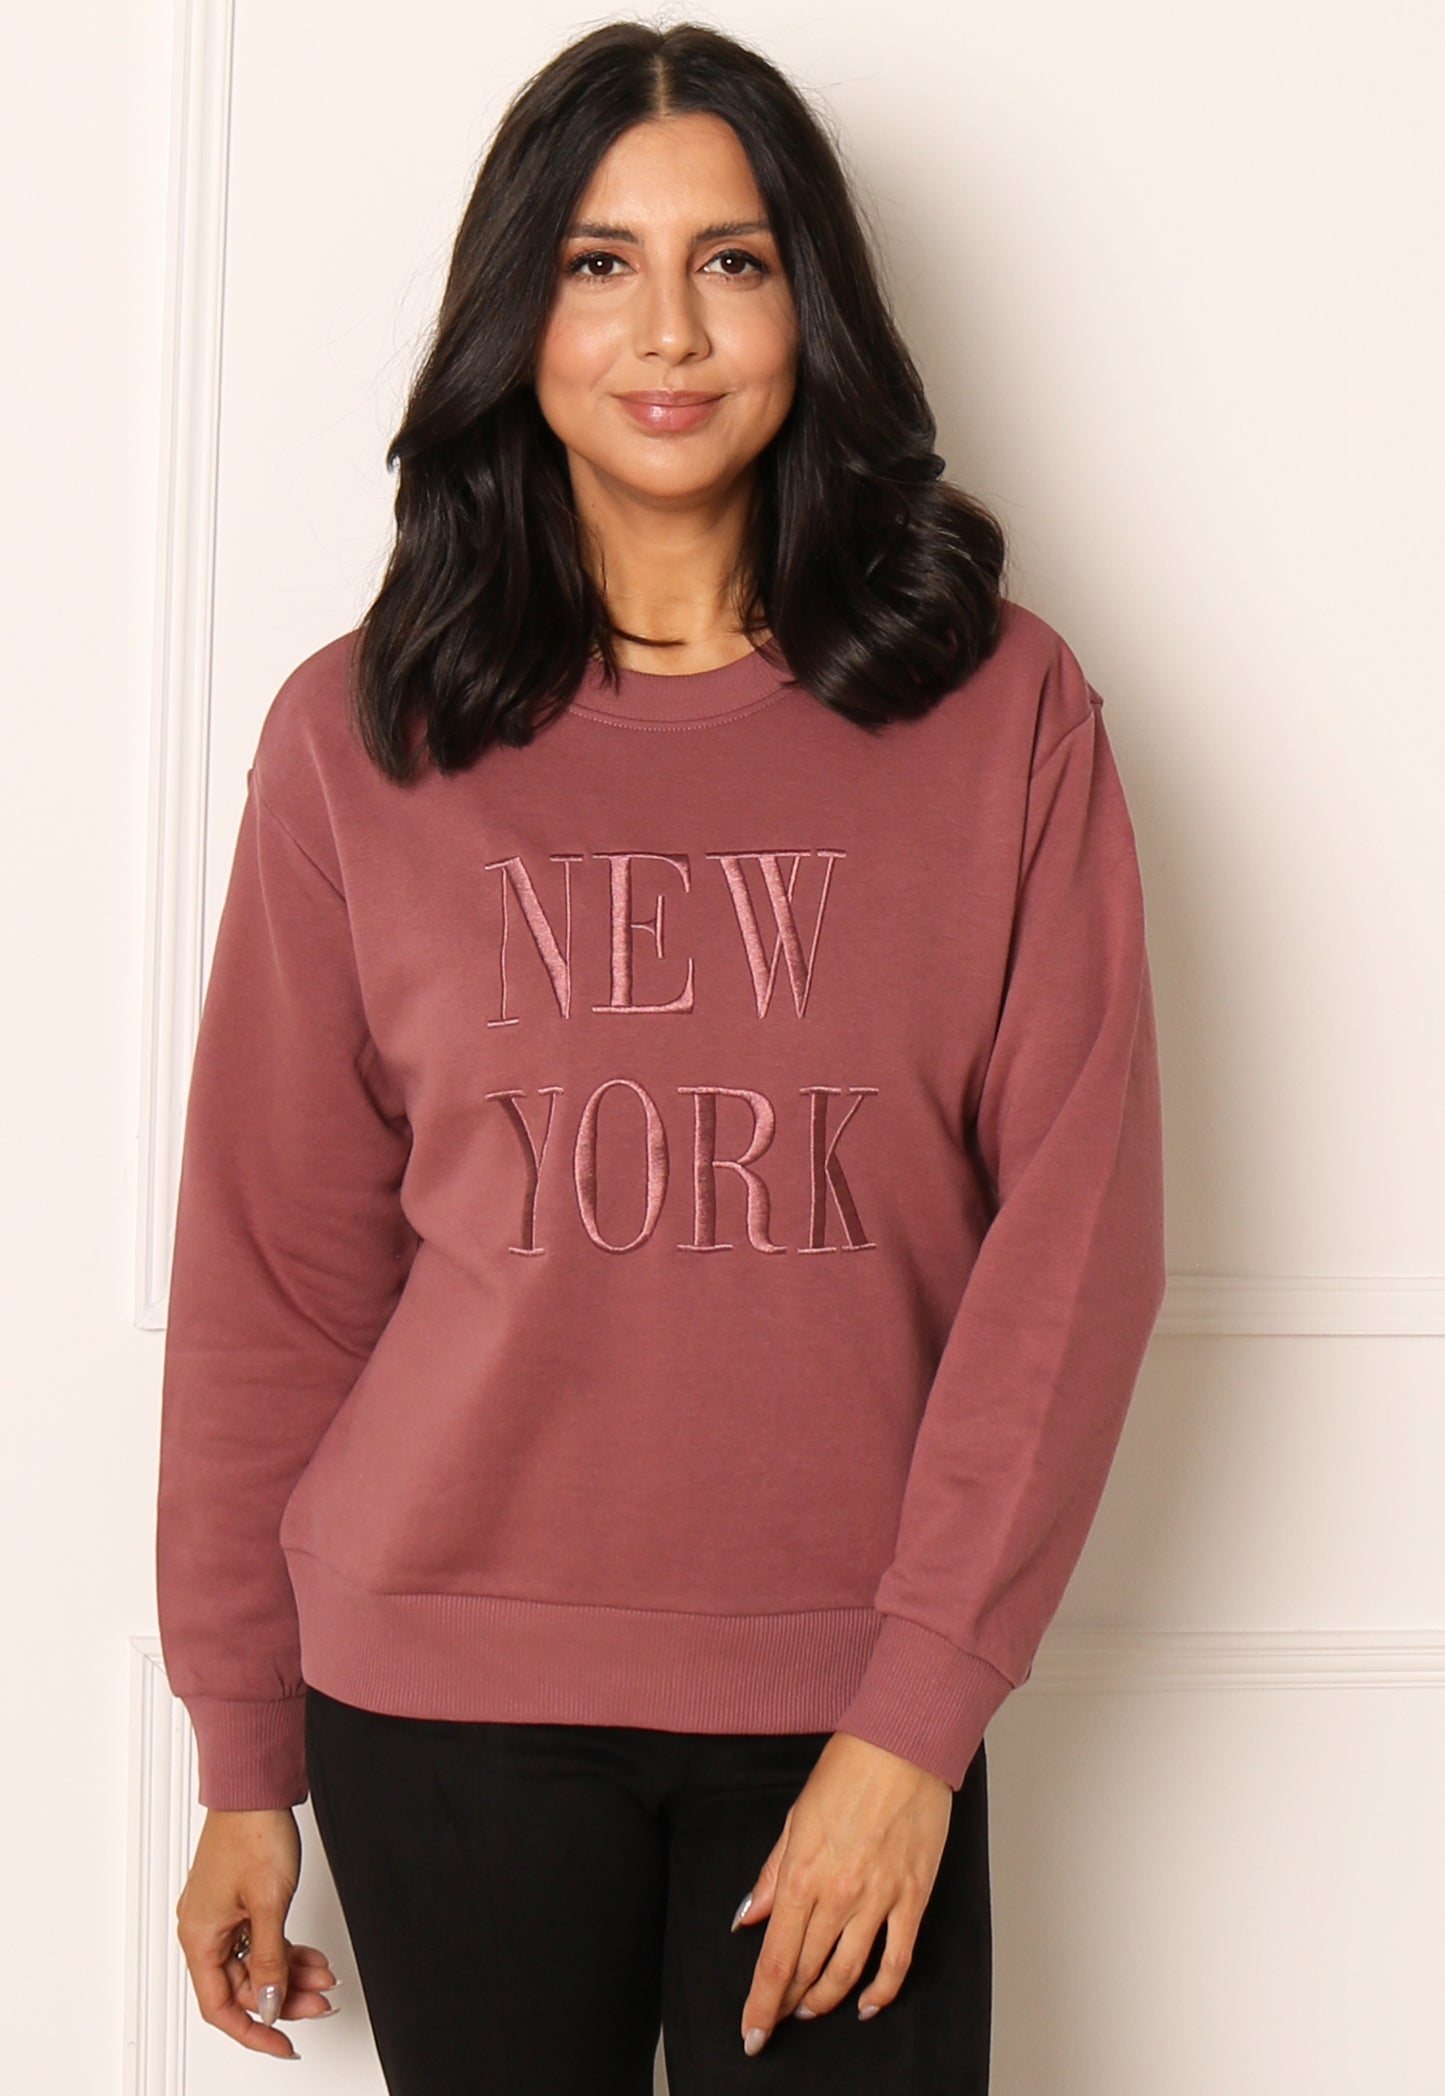 ONLY New York Embroidered Slogan Sweatshirt in Mauve - concretebartops